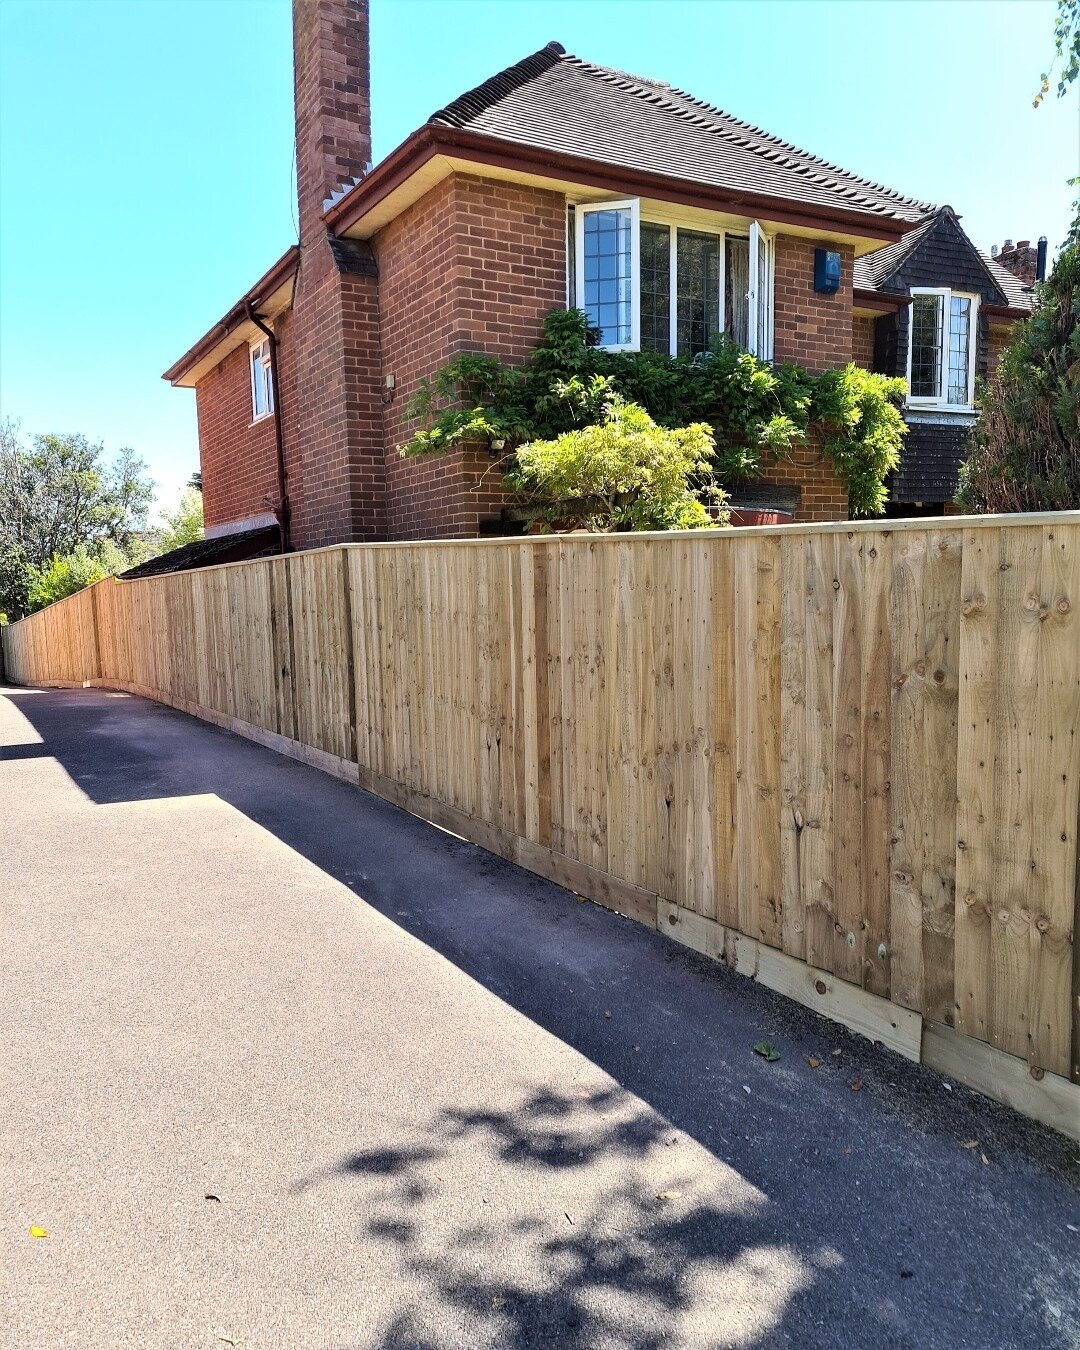 If you're in search of a simple fence that won't cost an arm and a leg, you can't go wrong with a traditional wooden fence &ndash; low maintenance and you can easily customise them with stain or paint!